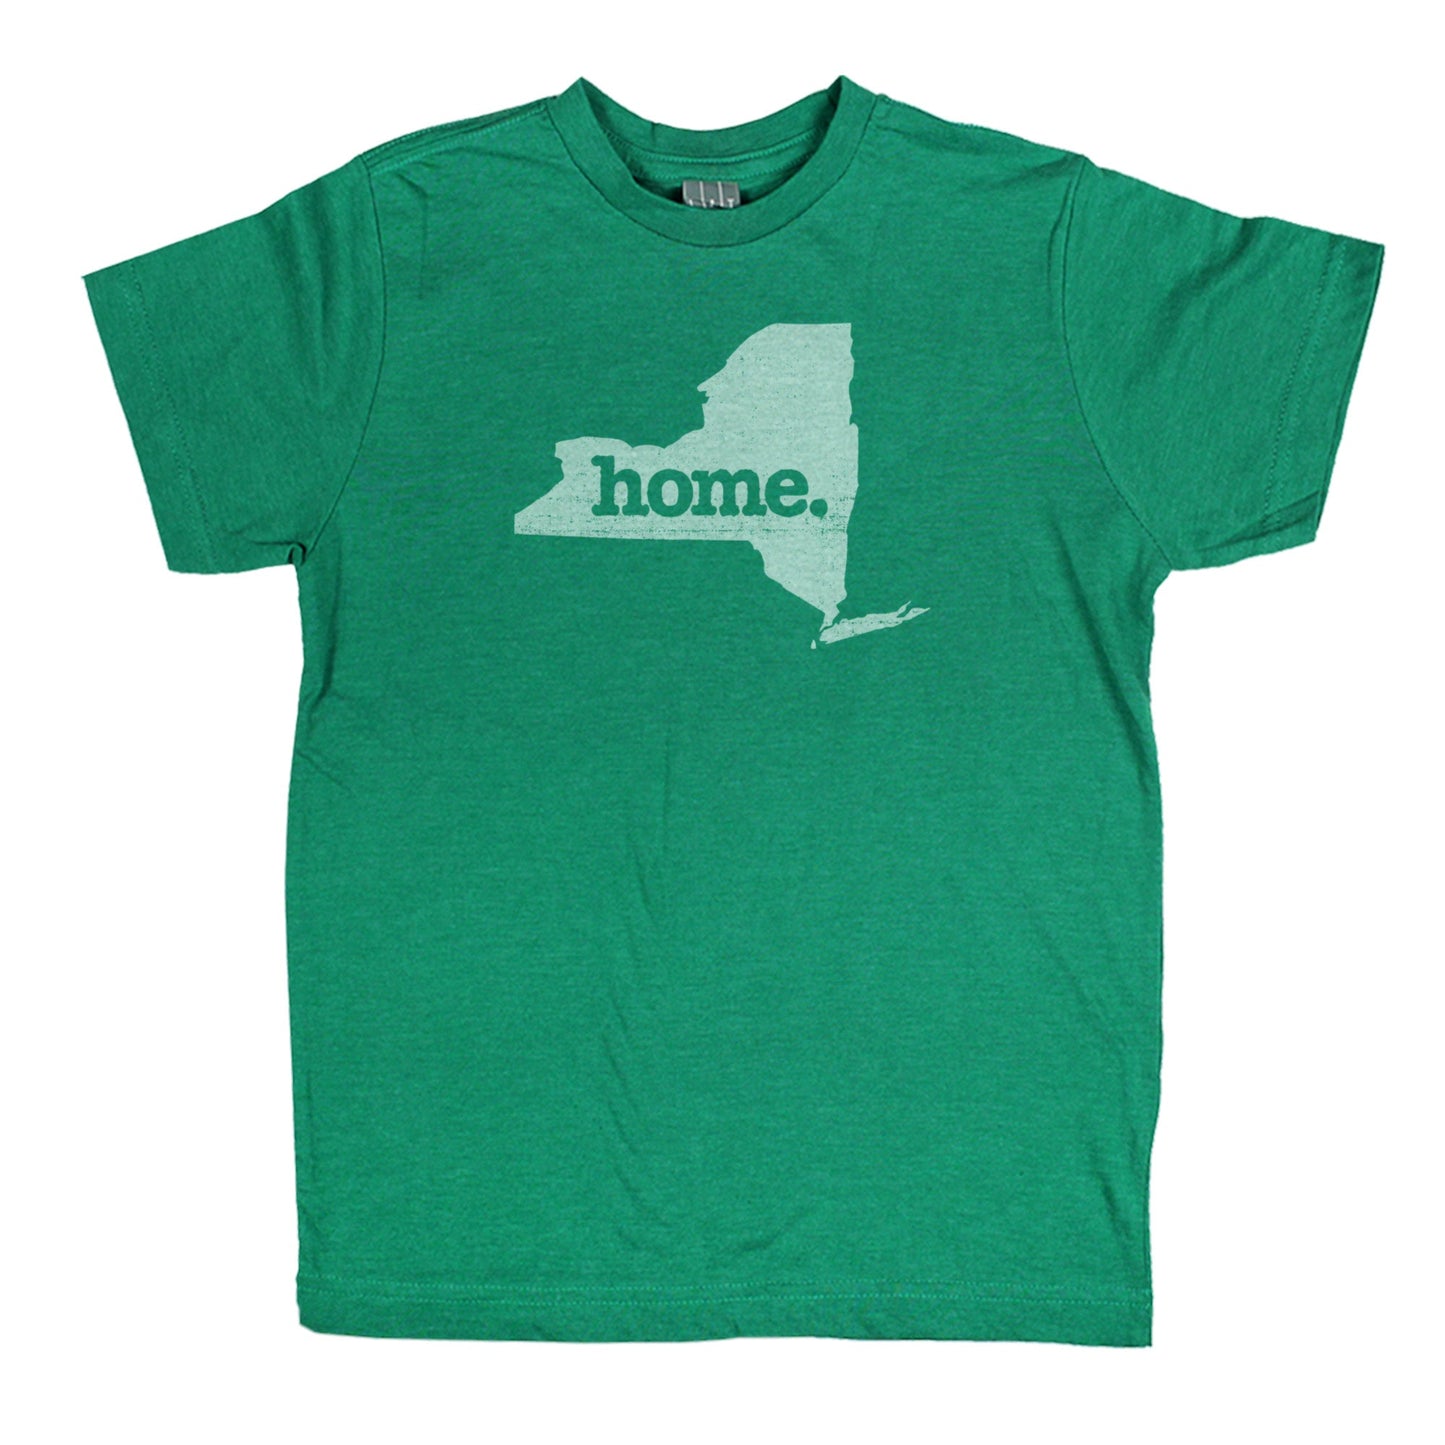 home. Youth/Toddler T-Shirt - New York